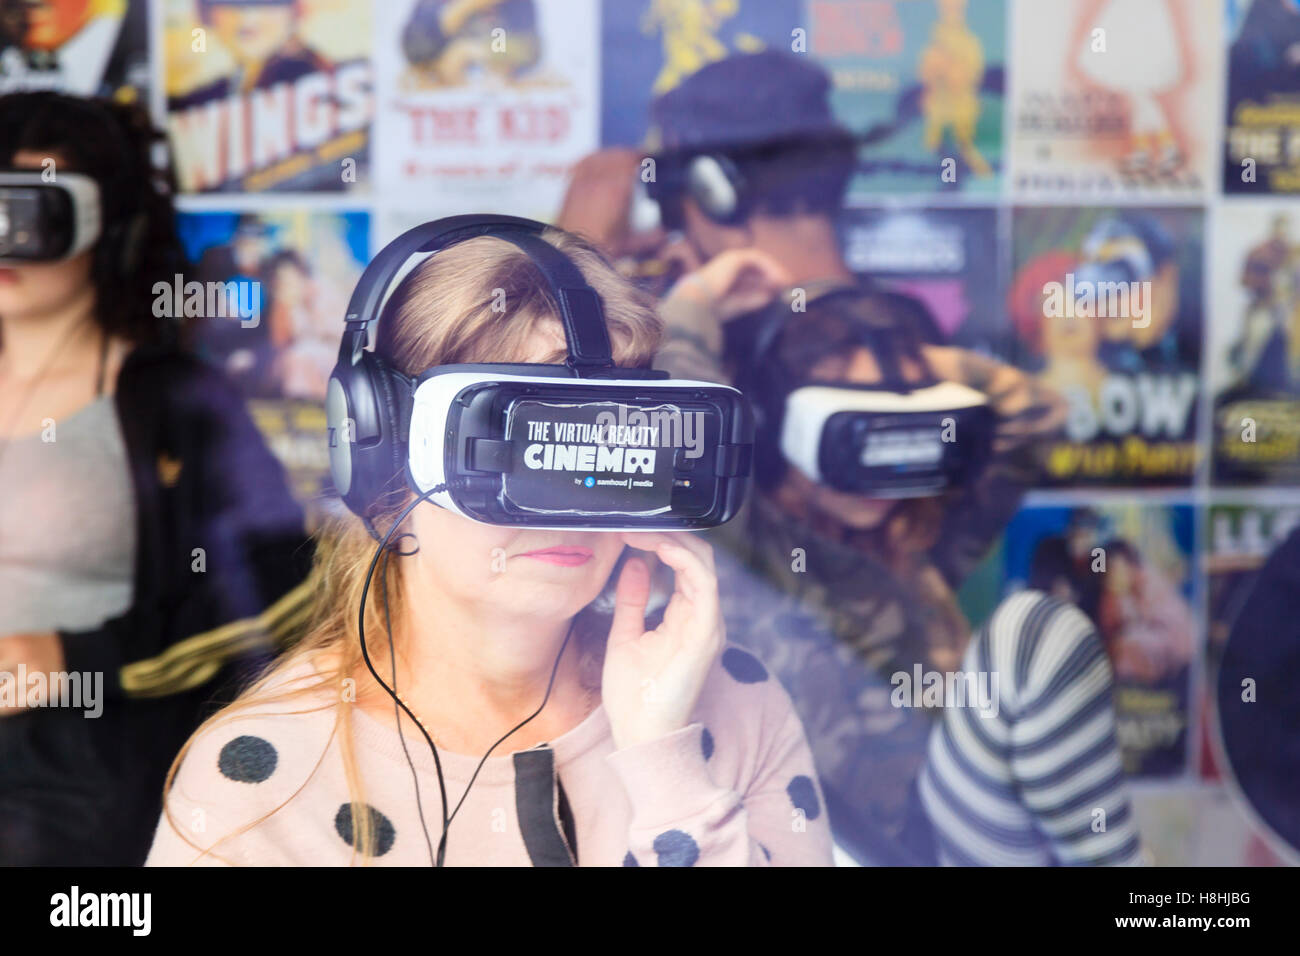 People wearing Virtual Reality head sets in The Virtual Reality Cinema Amsterdam, Netherlands Stock Photo